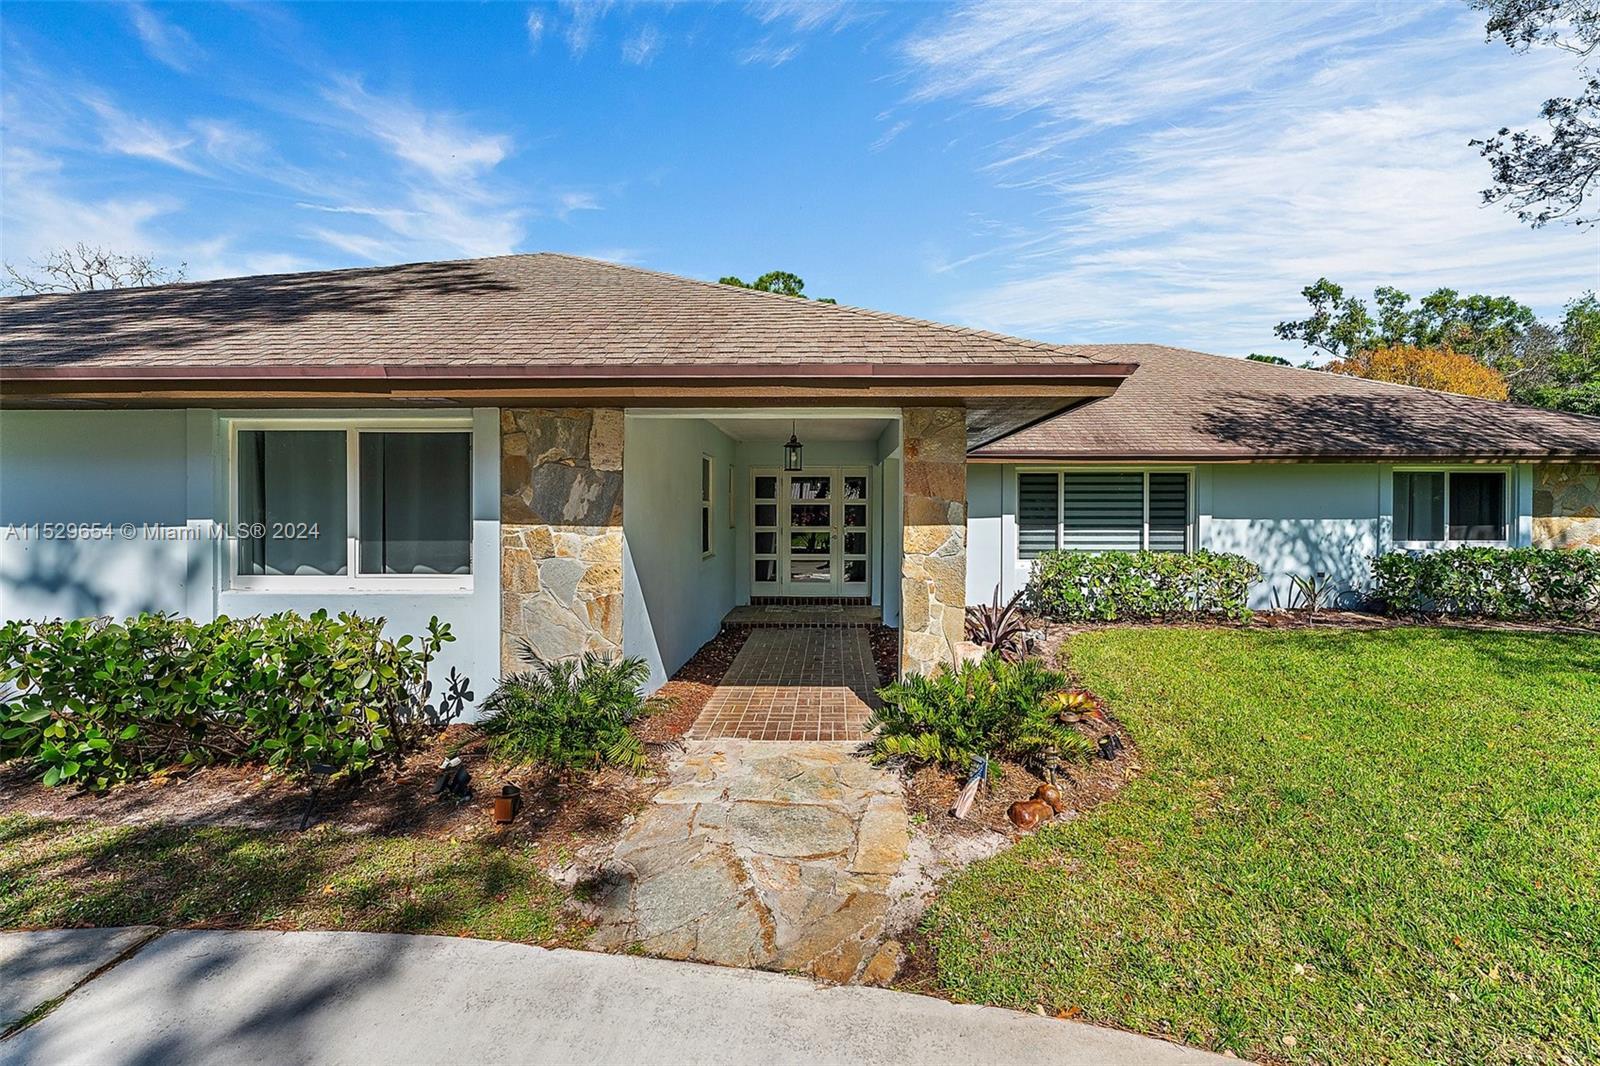 Welcome to your own slice of Paradise in sunny South Florida! This charming single story home offers